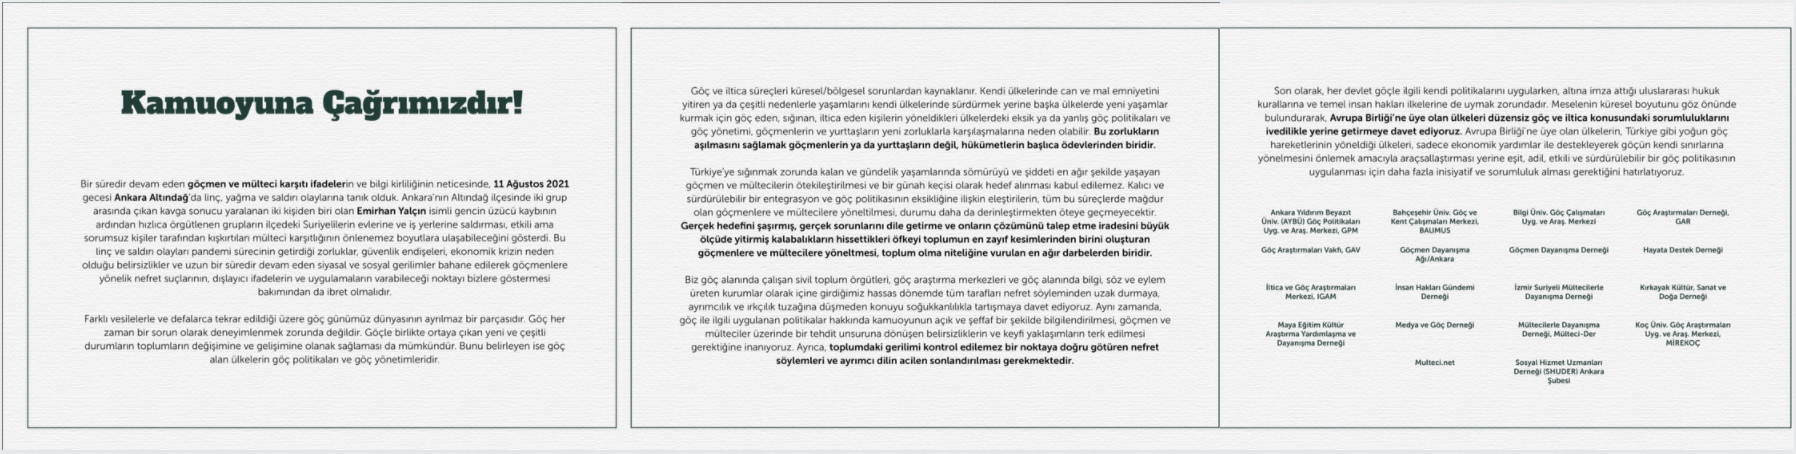 We Are Repeating Our Call To The Public #NefreteKarşıBirlikteYaşam (Living Together Against Hate) With New Supporters